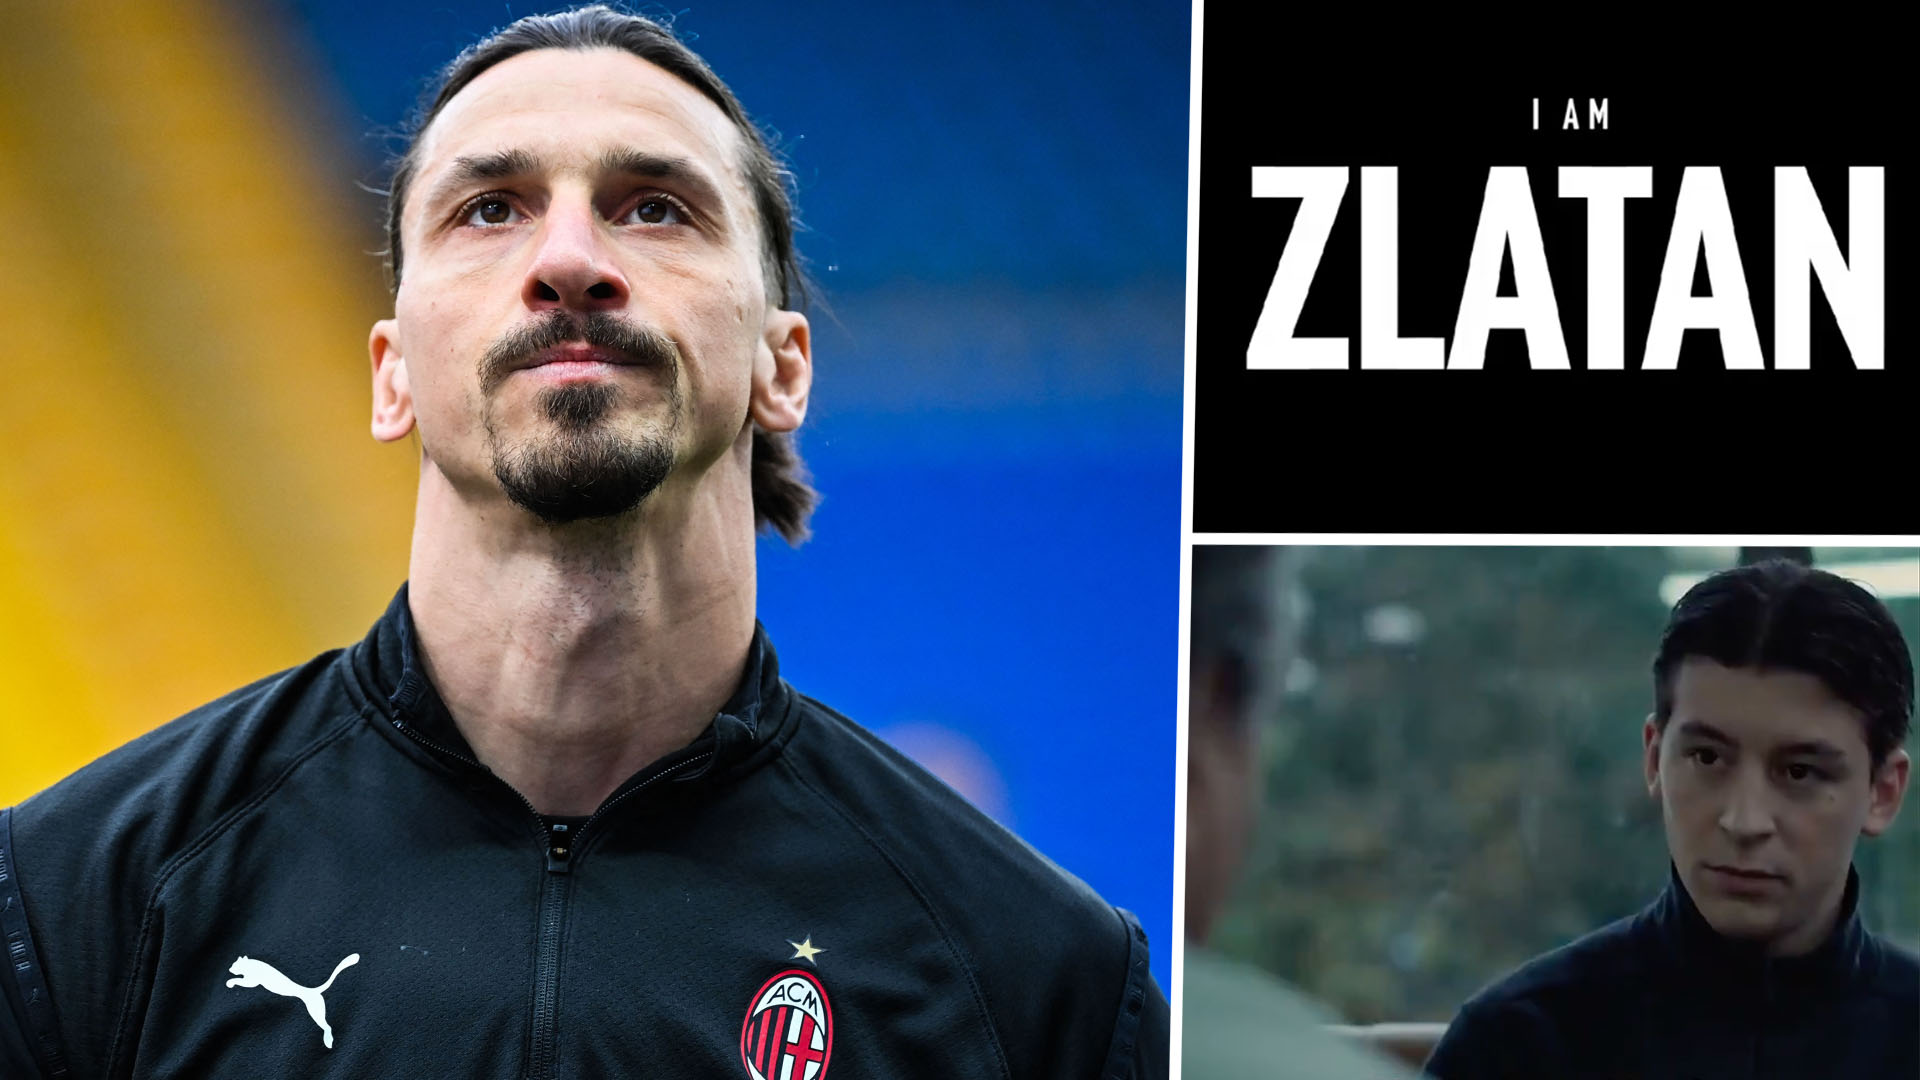 I Am Zlatan: Release date, how to watch & all the details about Ibrahimovic movie